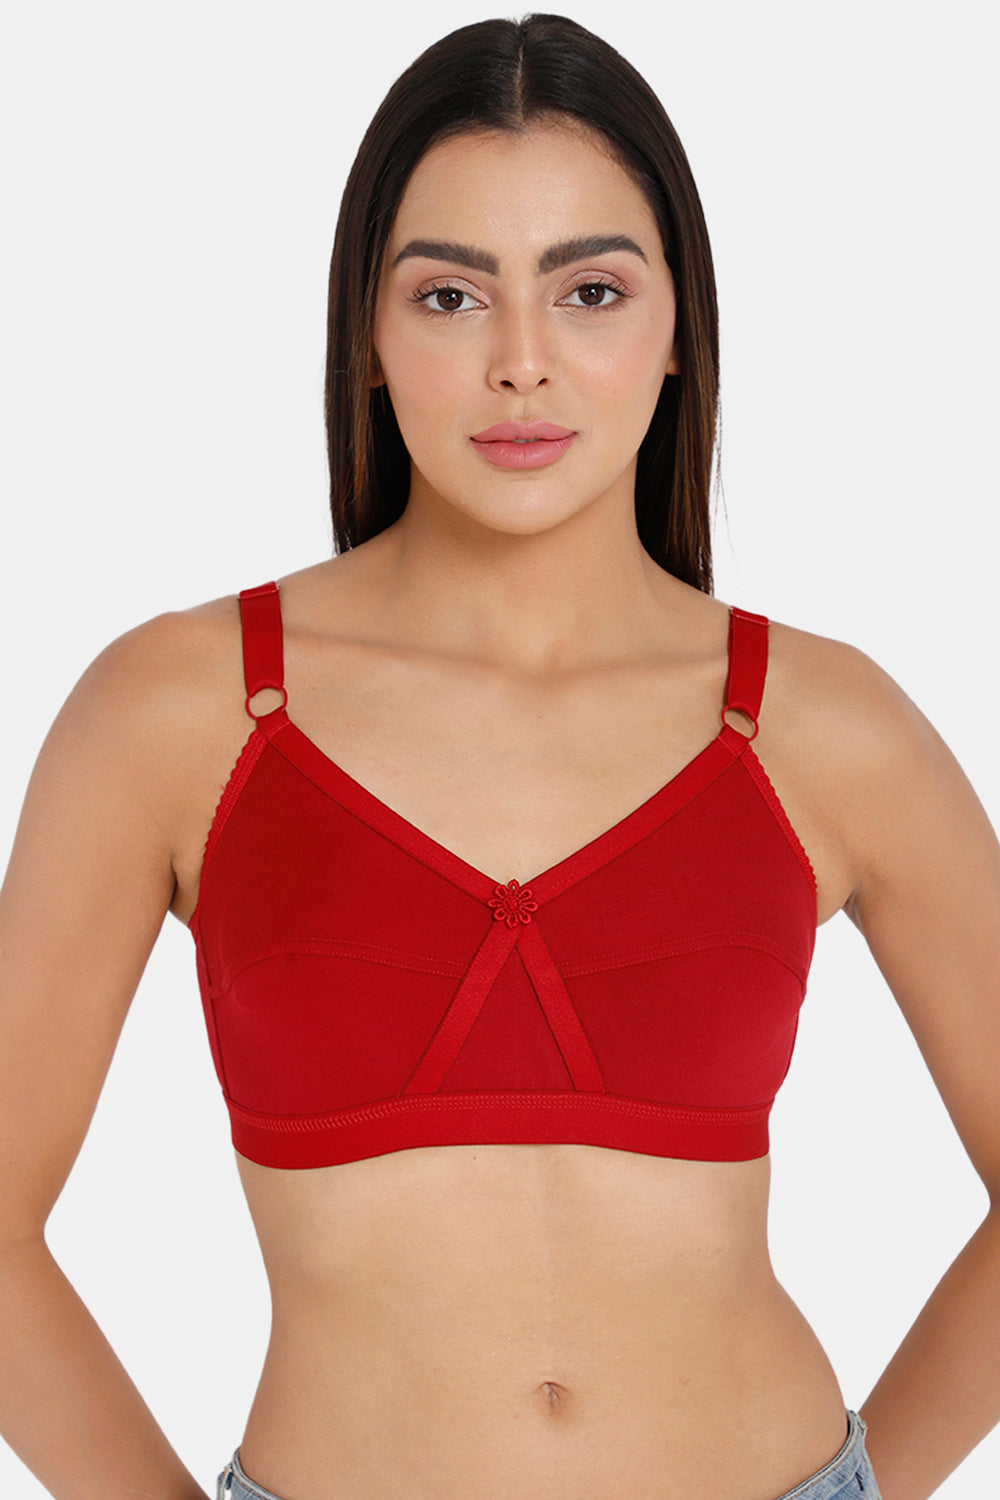 Buy TRYLO Women's Cotton Non-Wired RED Full Cup Non Padded